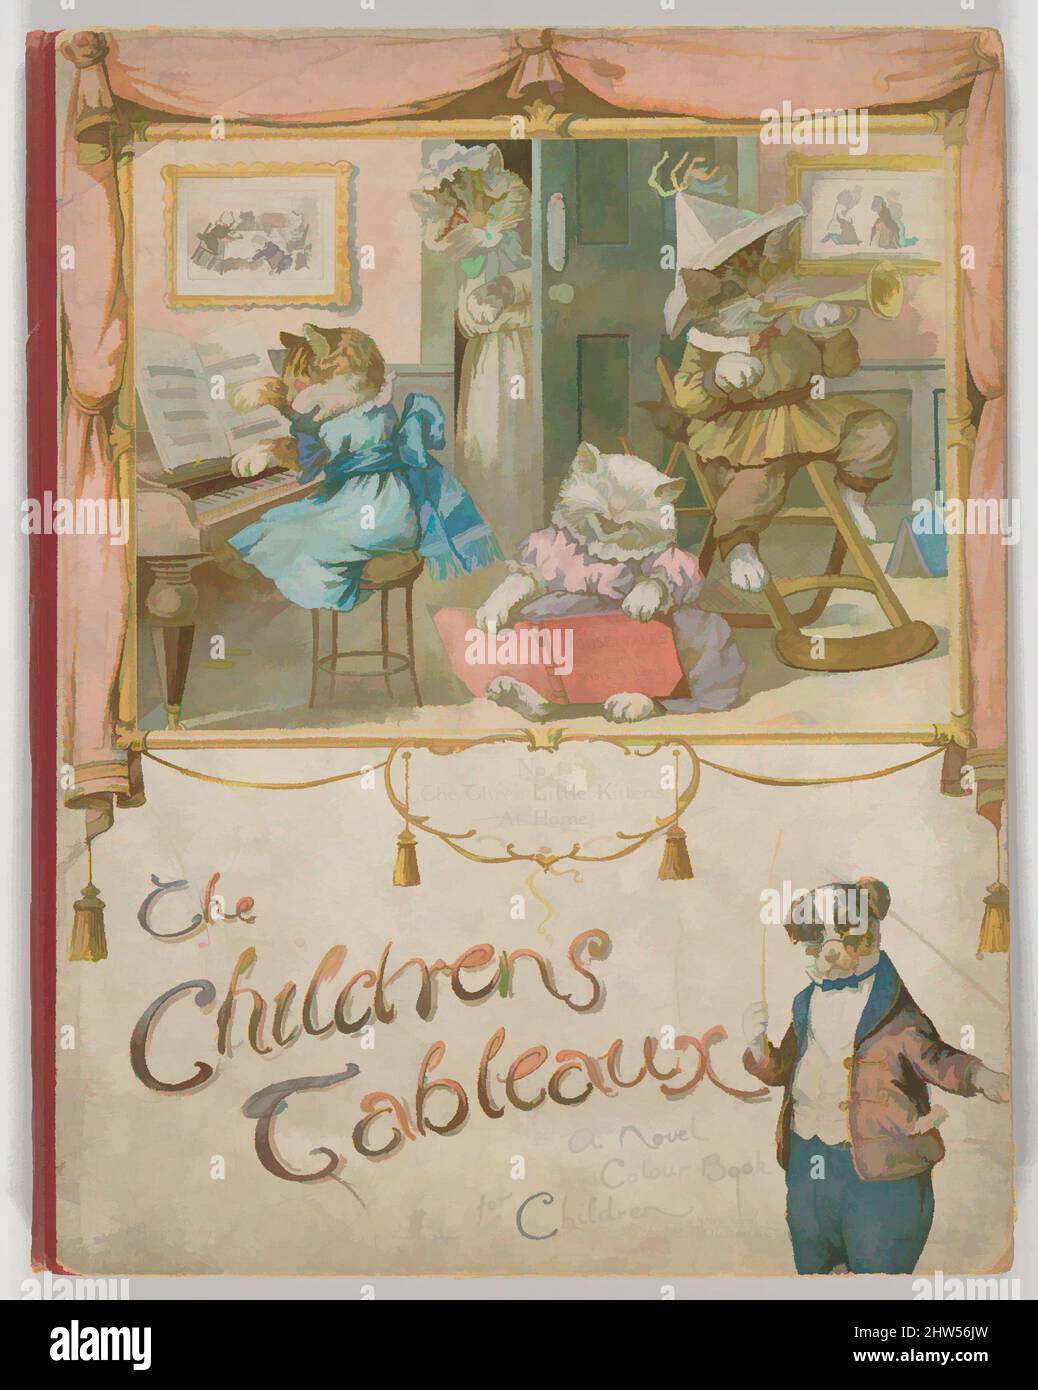 Art inspired by The Children's Tableaux. A Novel Colour Book with Pictures Arranged as Tableaux, ca. 1895, Illustrations: color lithography and commercial process, 10 x 12 6/8 x 11/12 in. (25.4 x 32.4 x 2.3 cm), Books, Classic works modernized by Artotop with a splash of modernity. Shapes, color and value, eye-catching visual impact on art. Emotions through freedom of artworks in a contemporary way. A timeless message pursuing a wildly creative new direction. Artists turning to the digital medium and creating the Artotop NFT Stock Photo